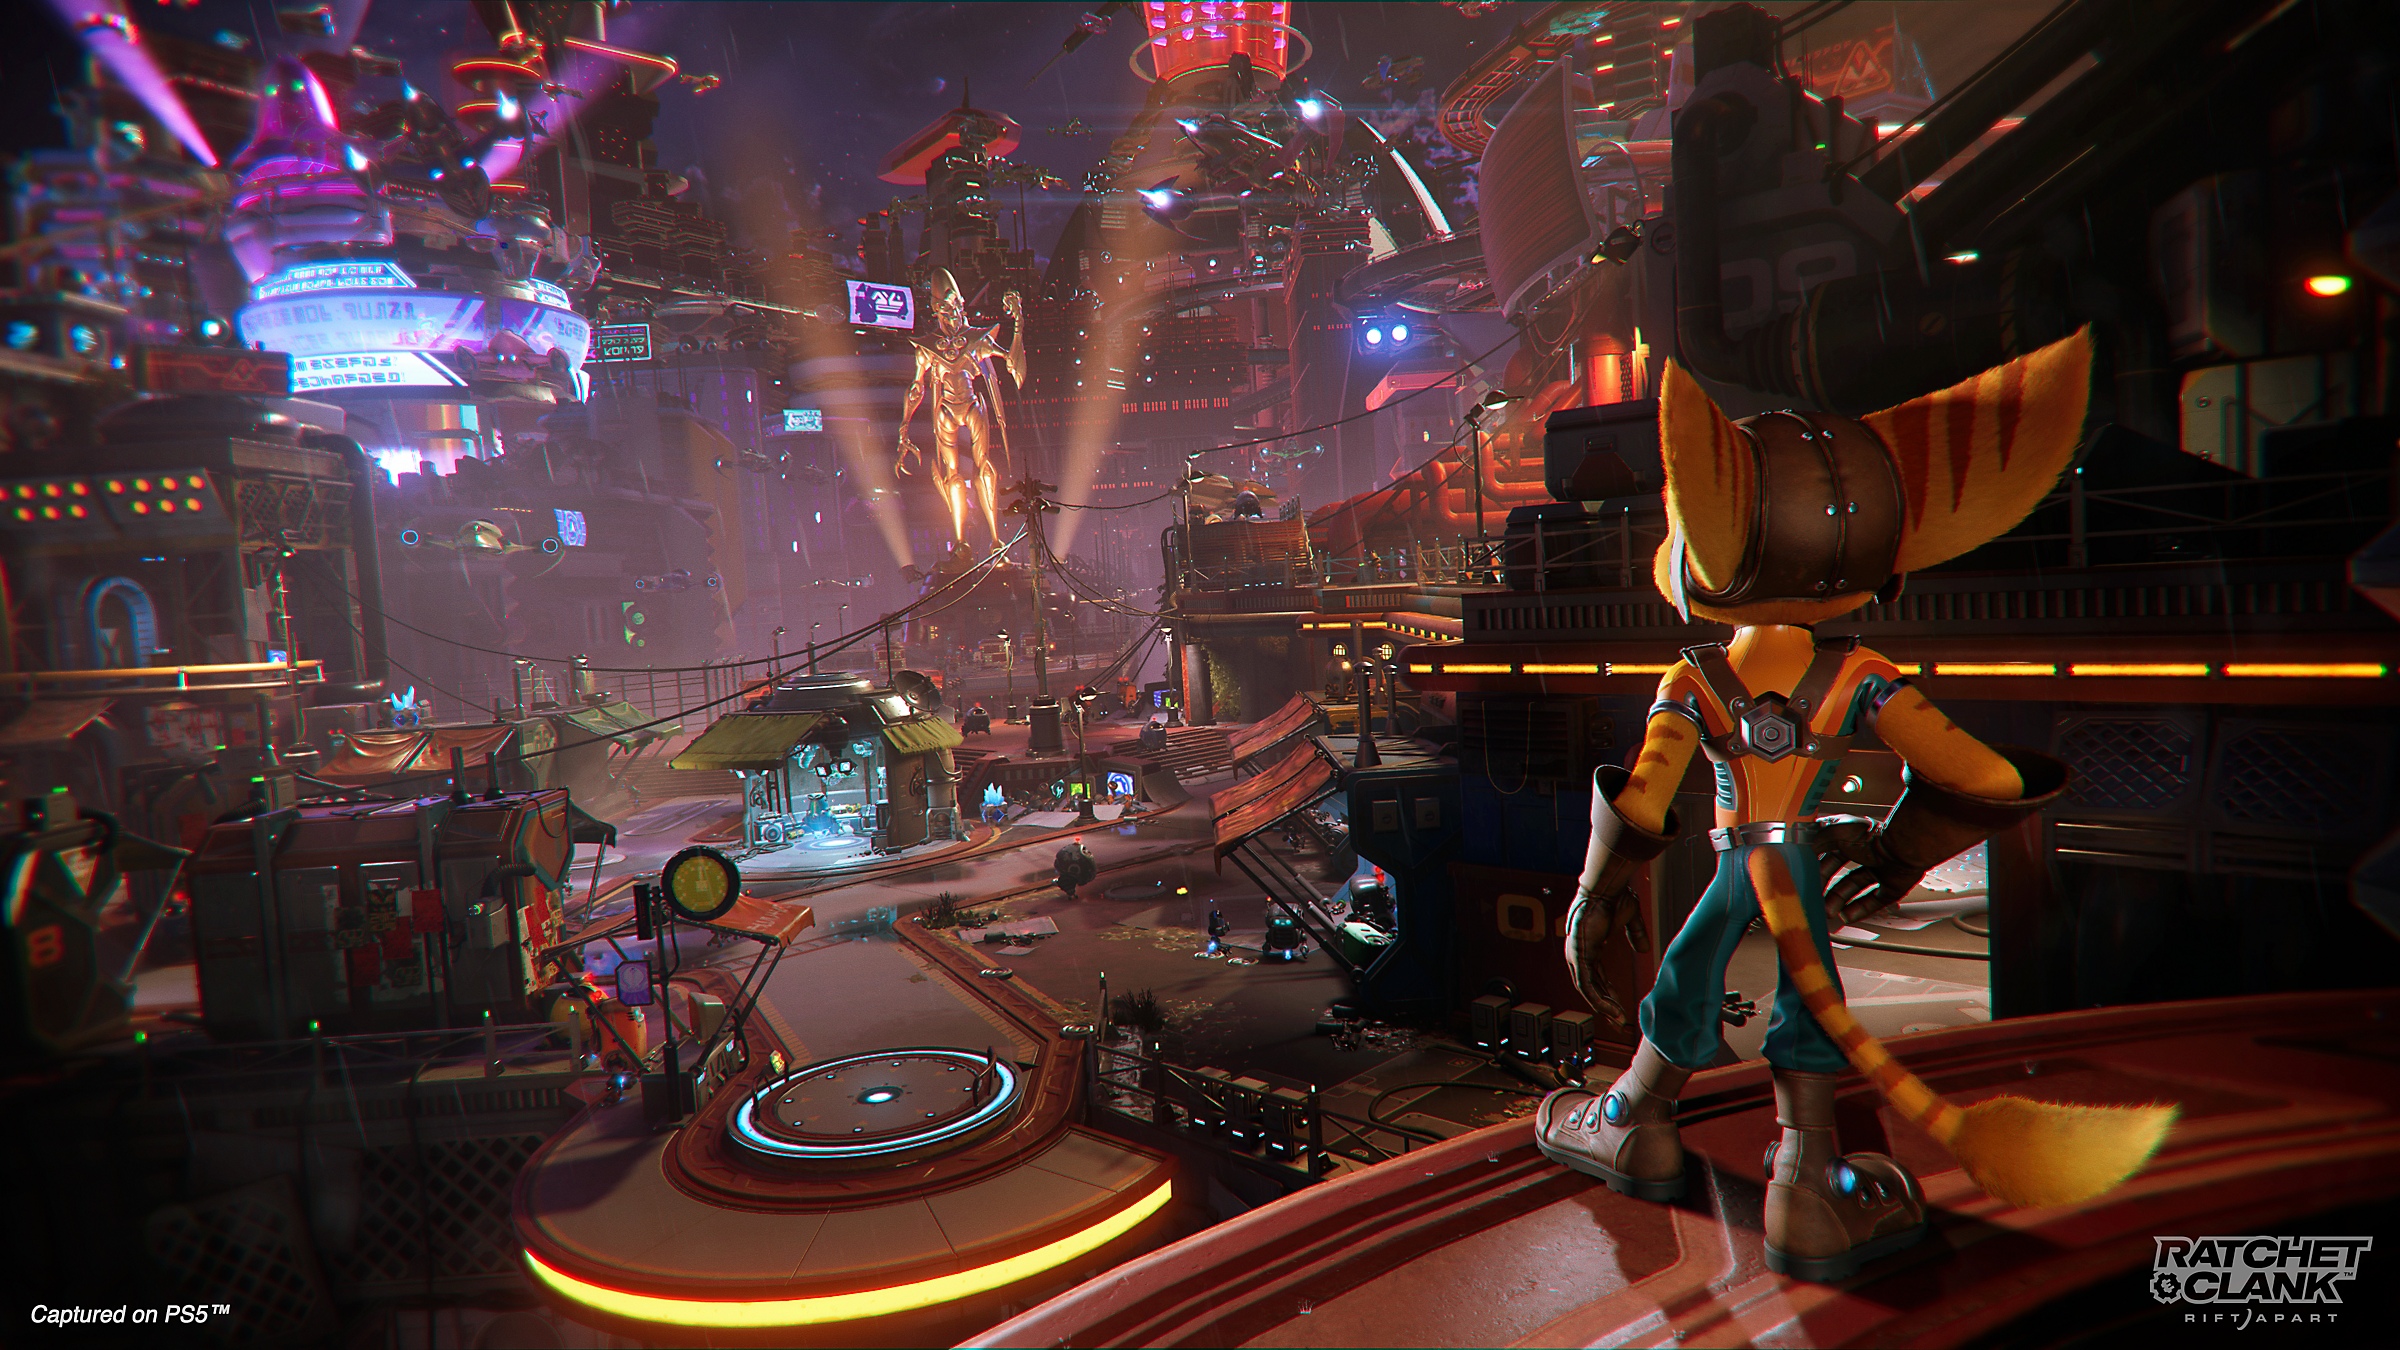 4K & HD Ratchet & Clank: Rift Apart Wallpaper You Need to Make Your Desktop Background